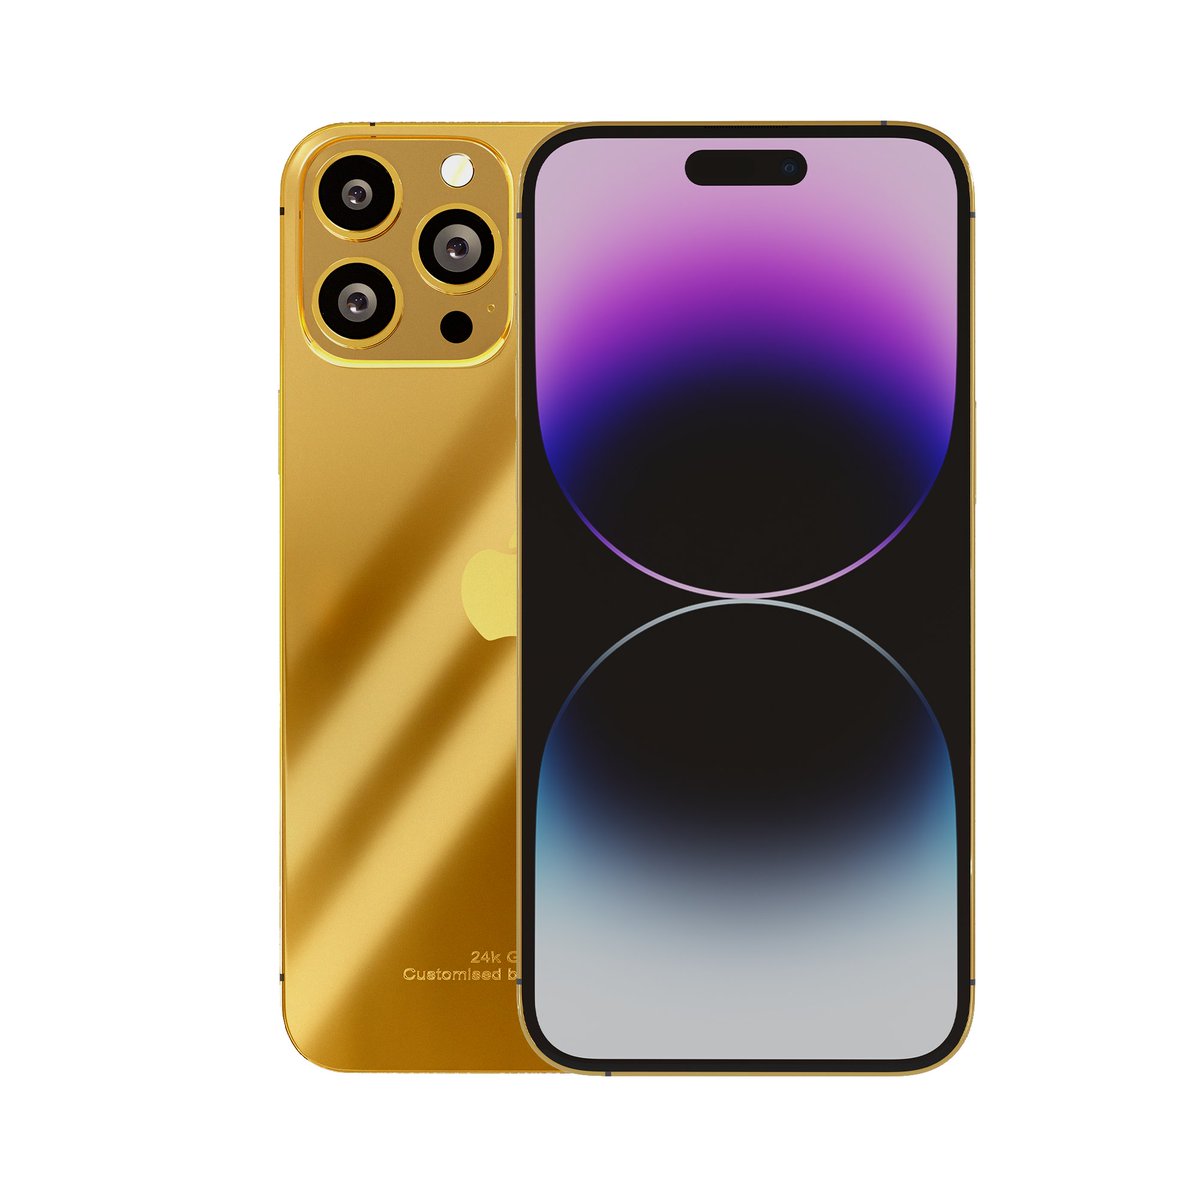 The NEW Gold iPhone 15 luxury series in authenticated 24k Gold, Rose Gold and Platinum is now available for Pre-order... Click link to view and see promo video:
#GoldiPhone15 #24kGoldiPhone #GoldiPhone #iPhone15 $CNS $BTC $ETH $XRP #Fiat 
goldgenie.com/iphone-15-luxu…